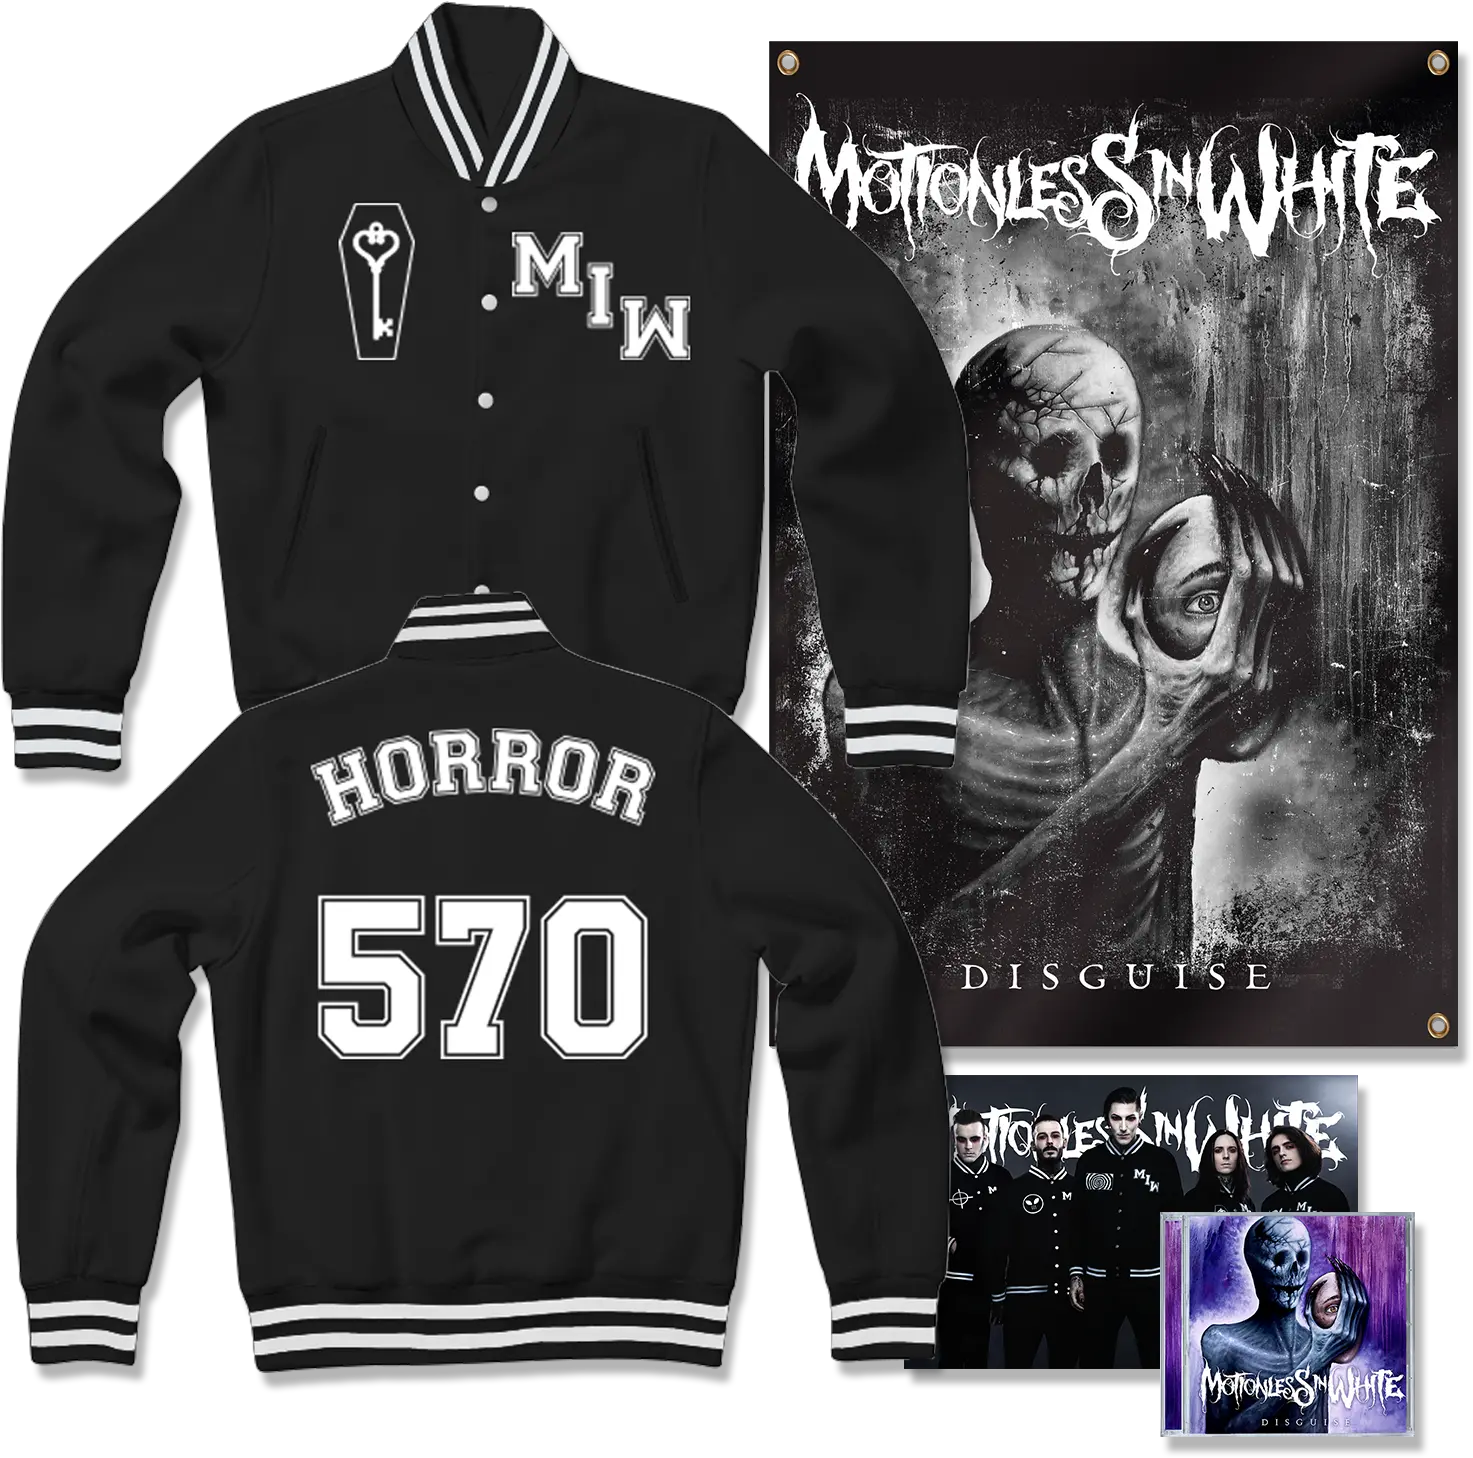 Motionless In White Motionless In White Disguise Jacket Png Motionless In White Logo